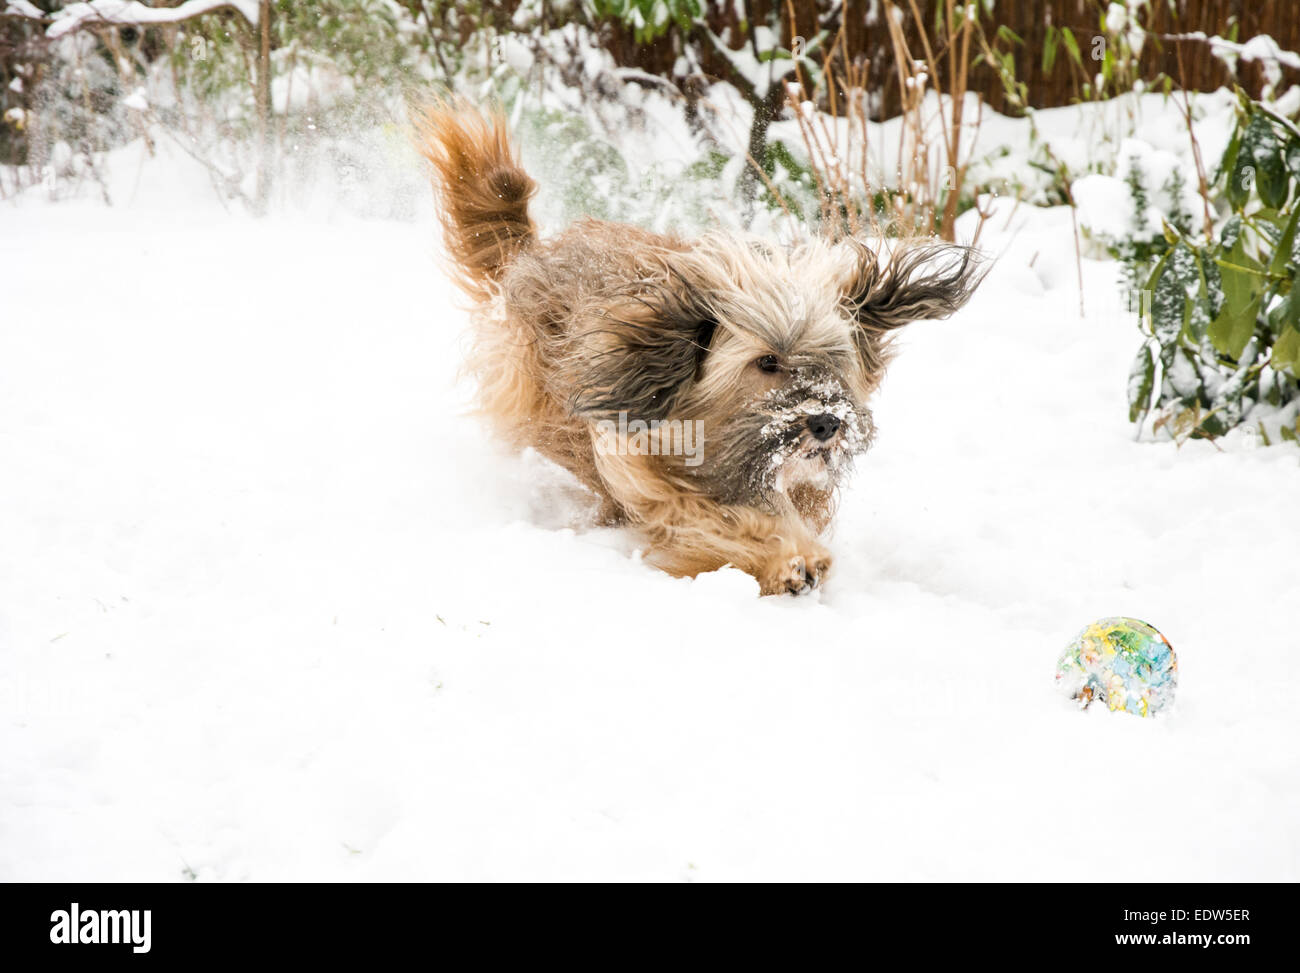 Dog agility - tibetan terrier running, jumping and catching a ball in the snow. Stock Photo